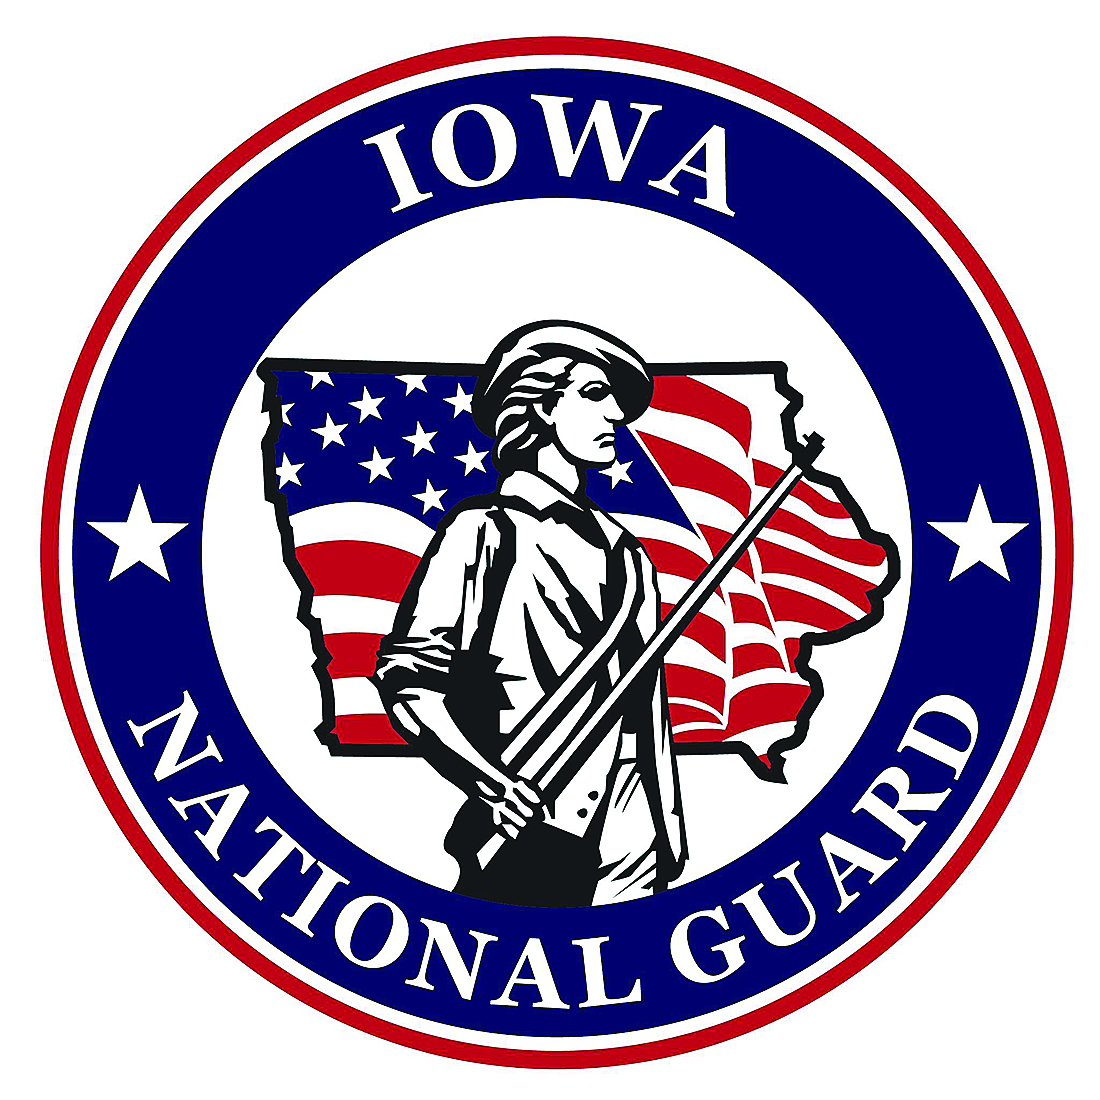 Modified send-off ceremonies scheduled for area National Guard units